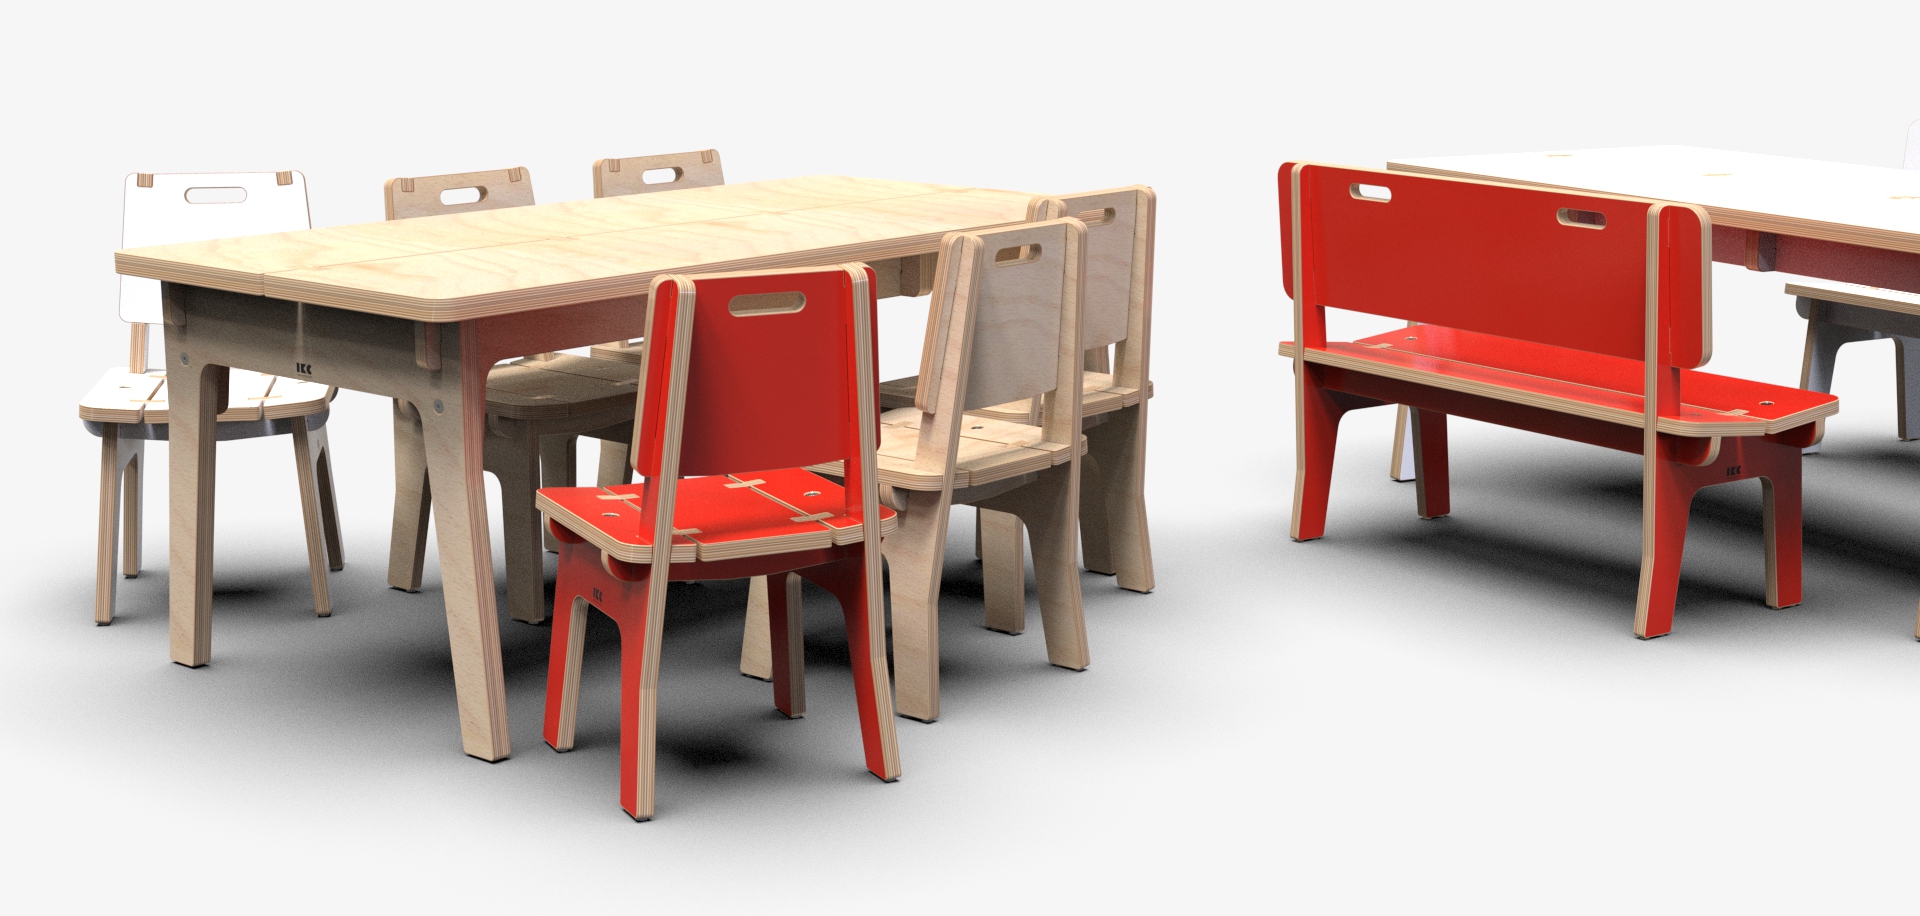 IKC | Children's furniture chairs and tables